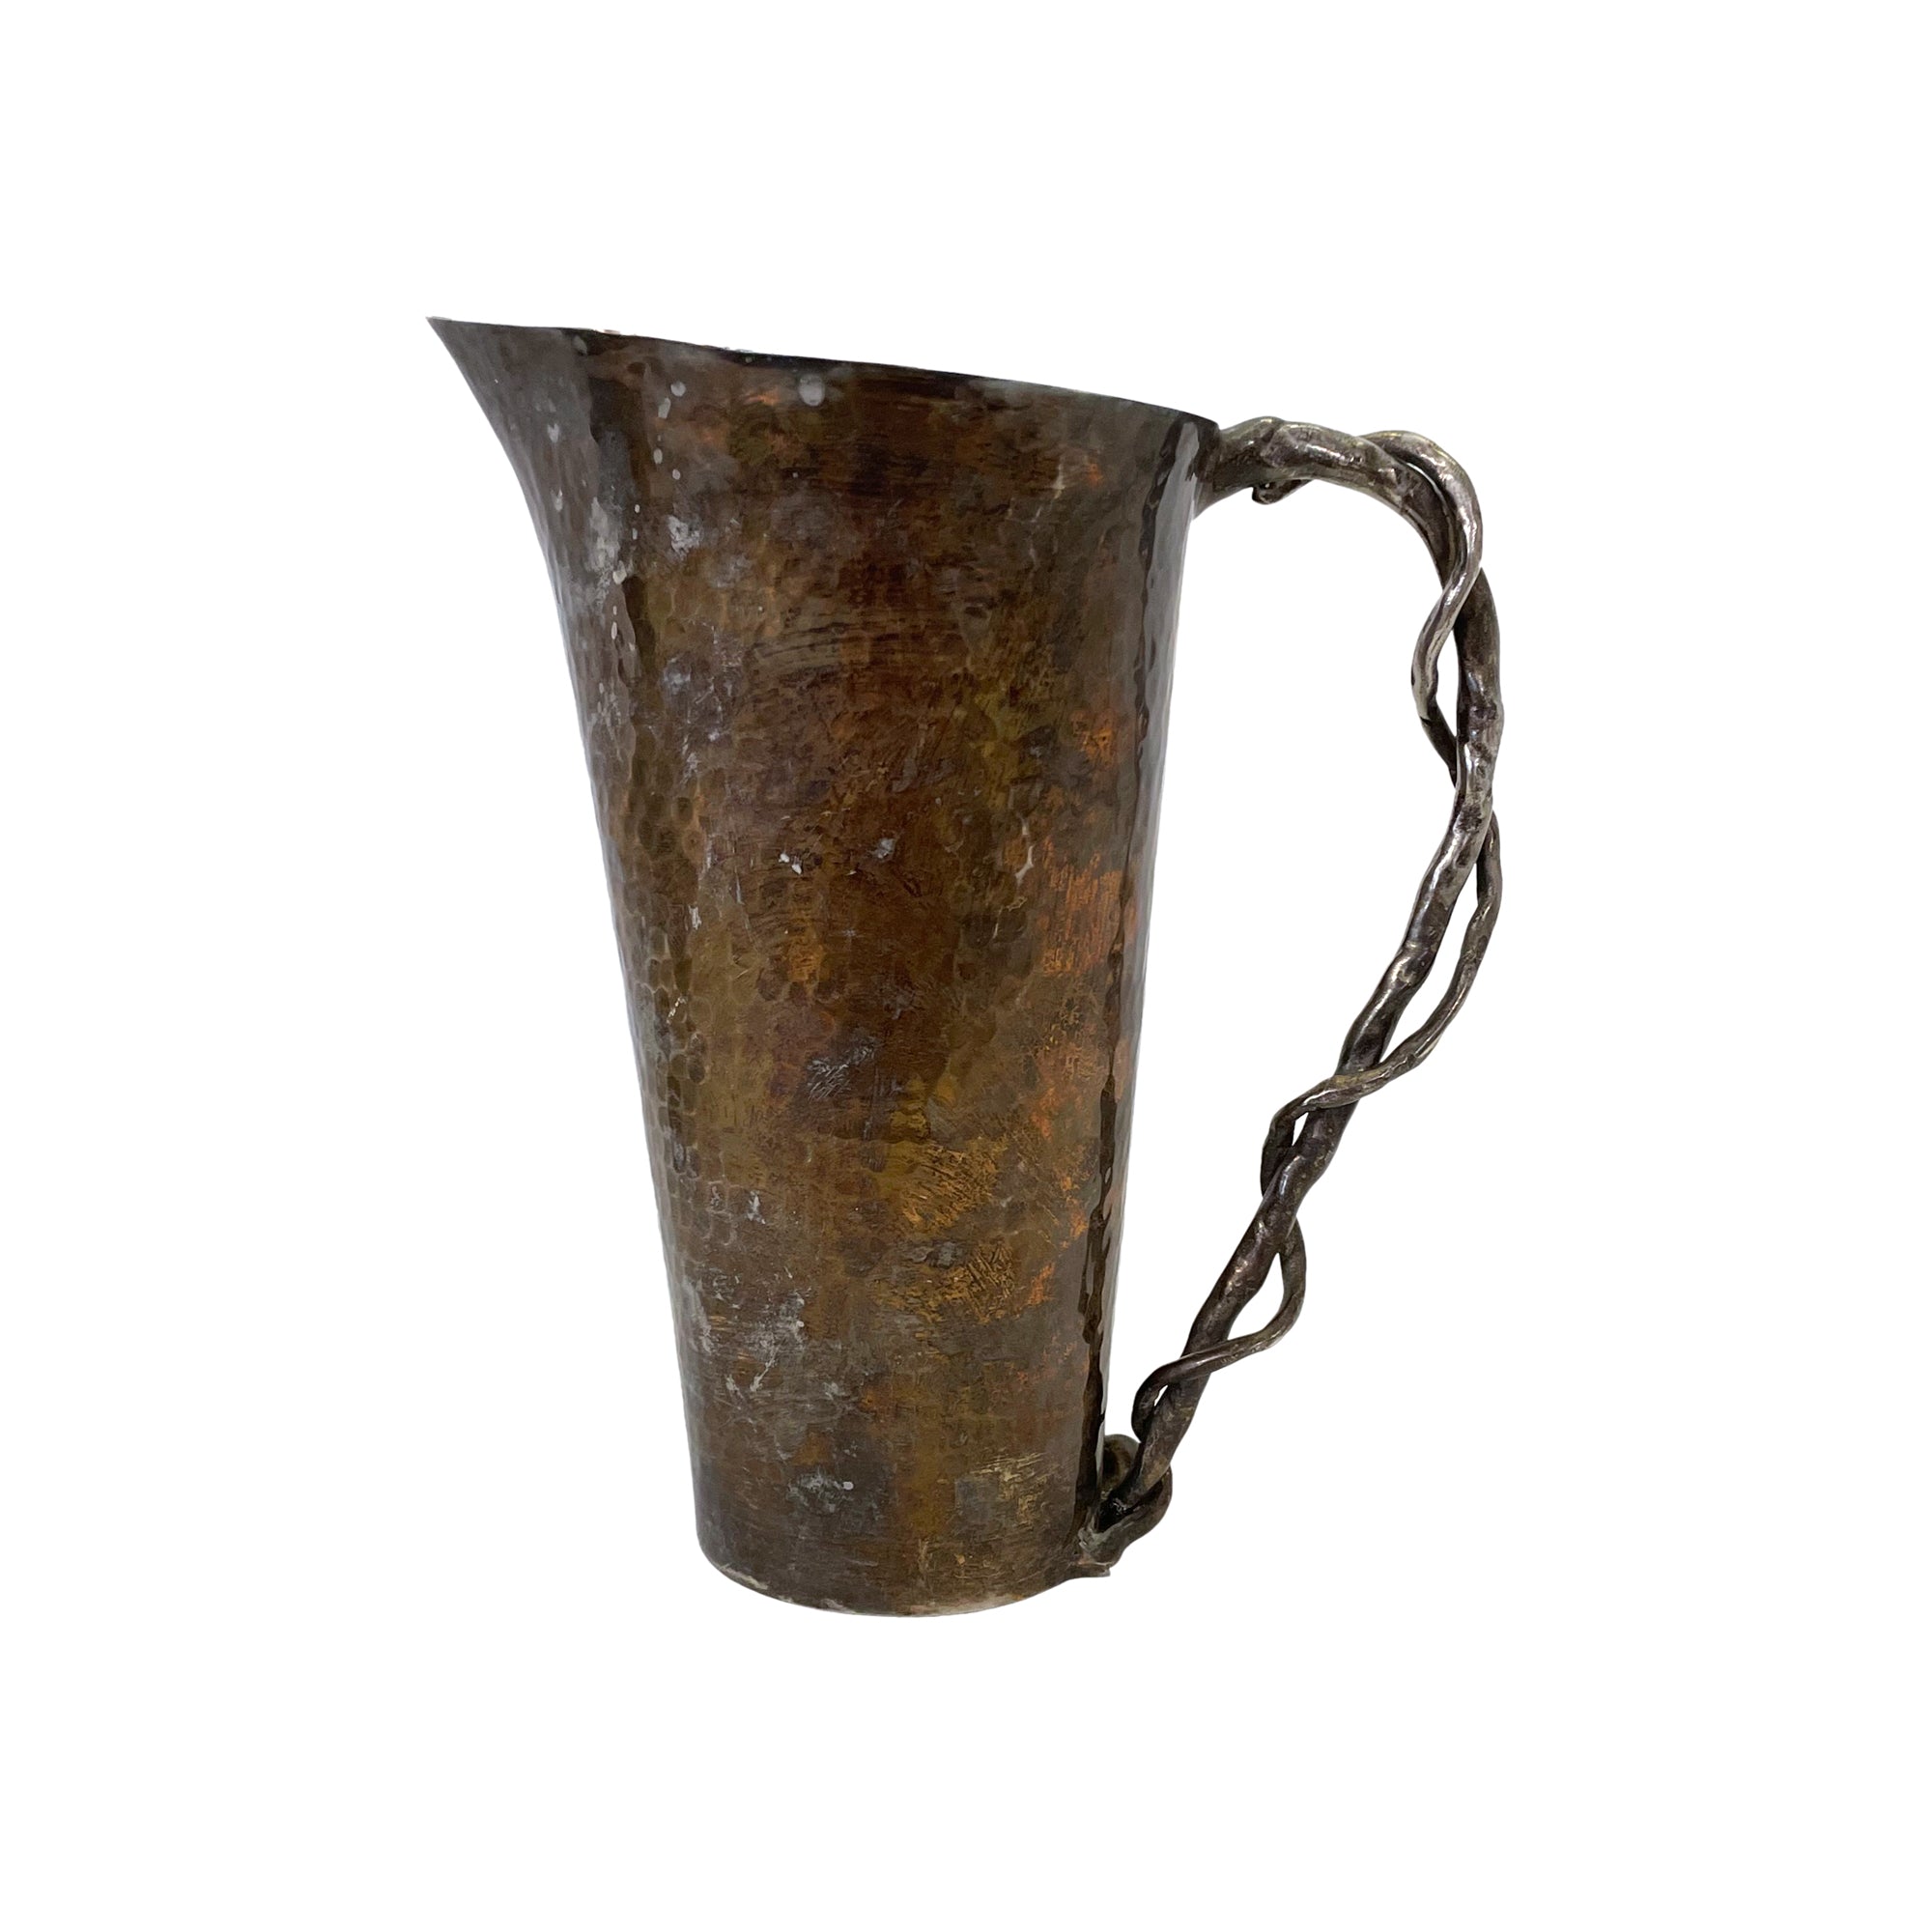 Silverplate Hammered Pitcher by Aram